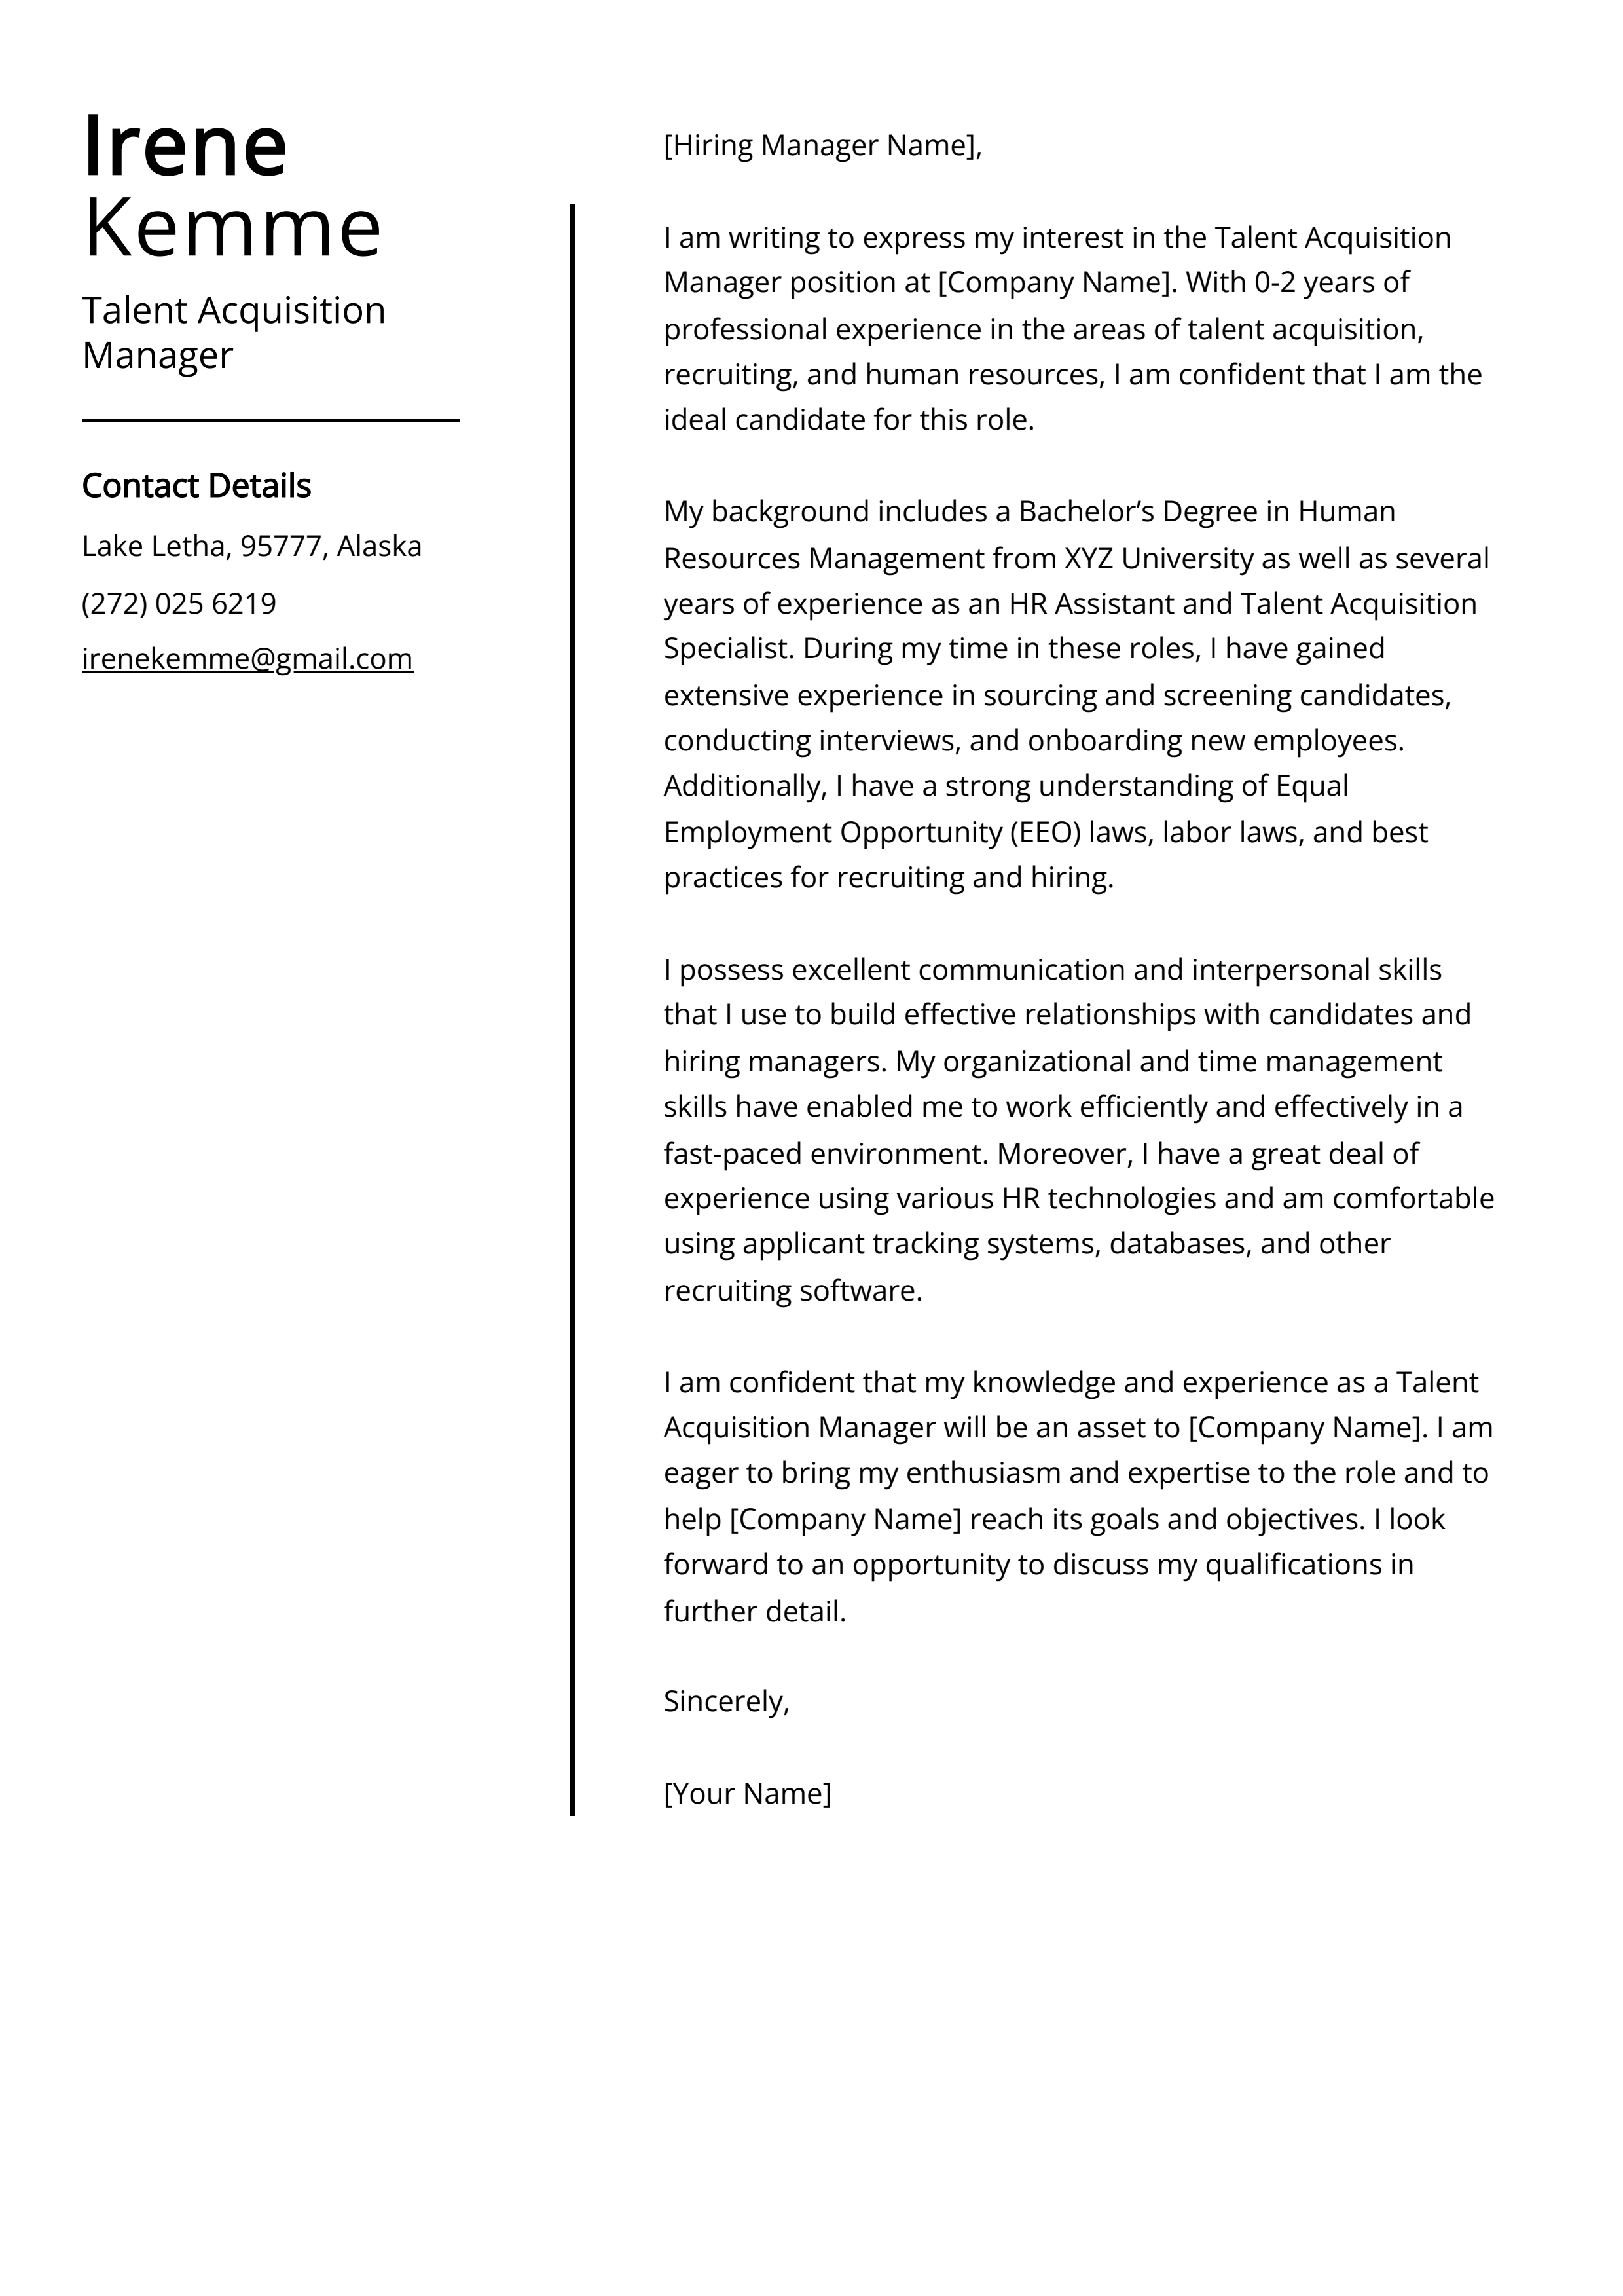 Talent Acquisition Manager Cover Letter Example